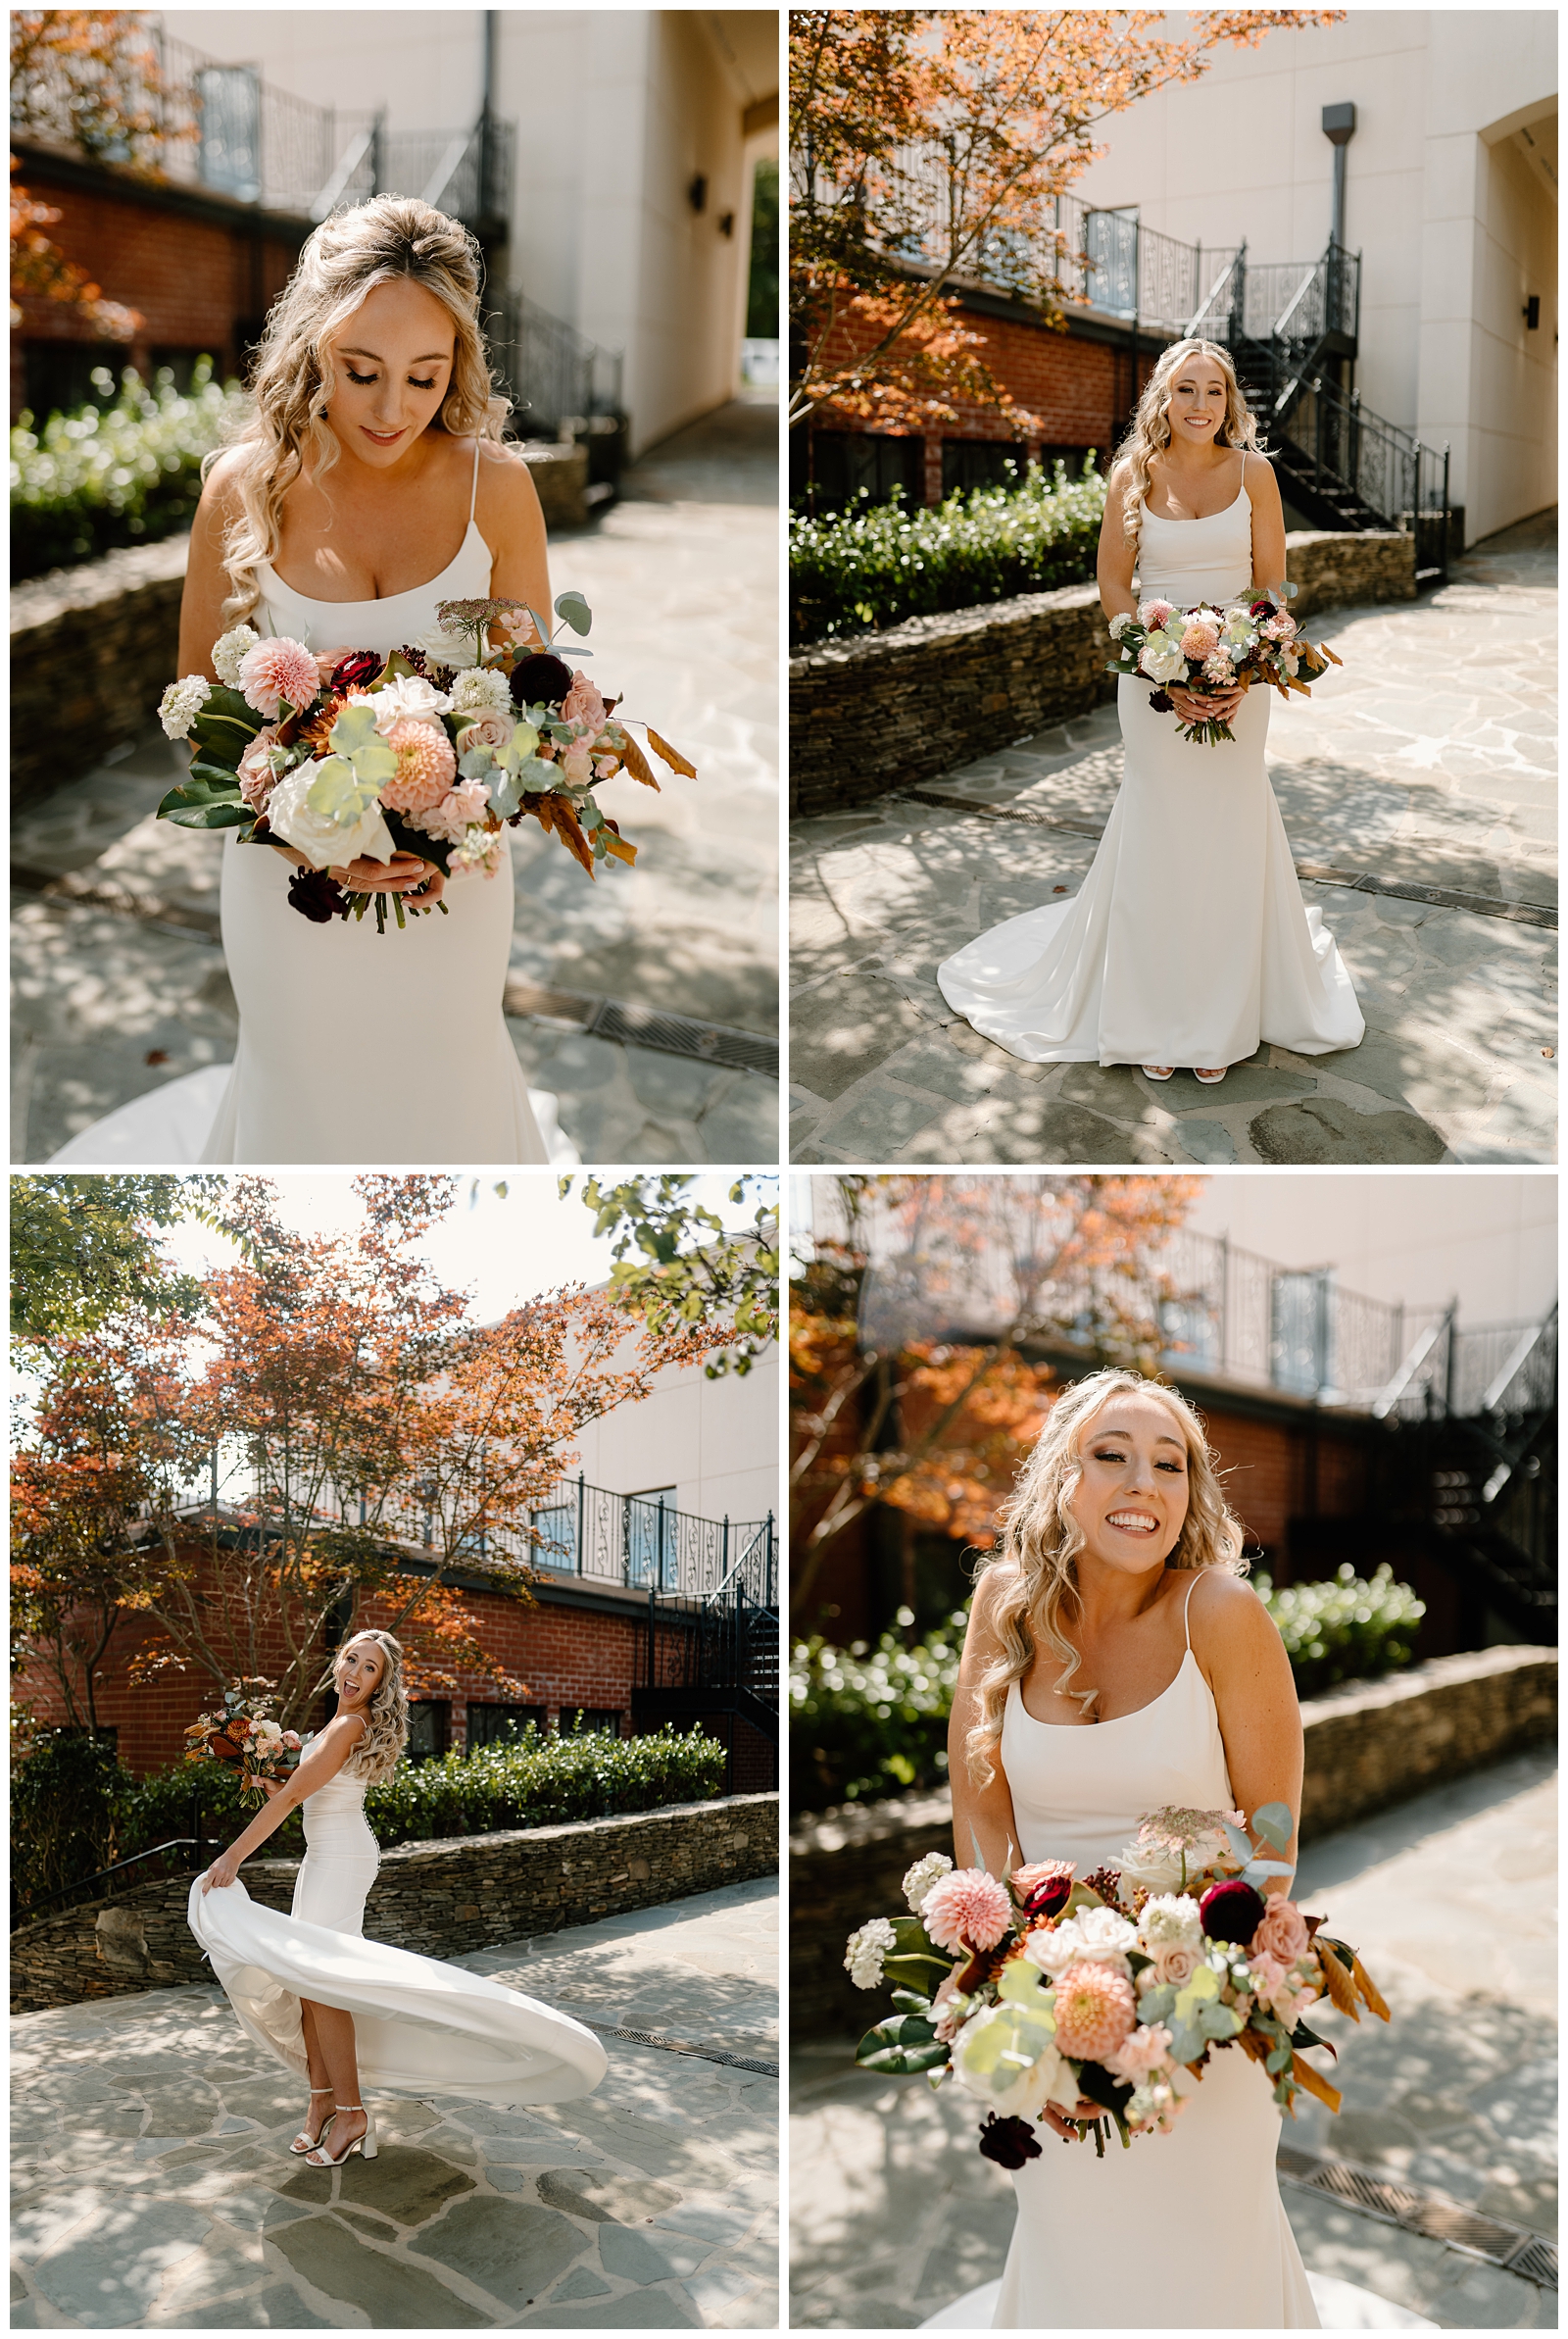 Fun, happy portraits of bride on her wedding day at Revolution Mill in Greensboro, NC